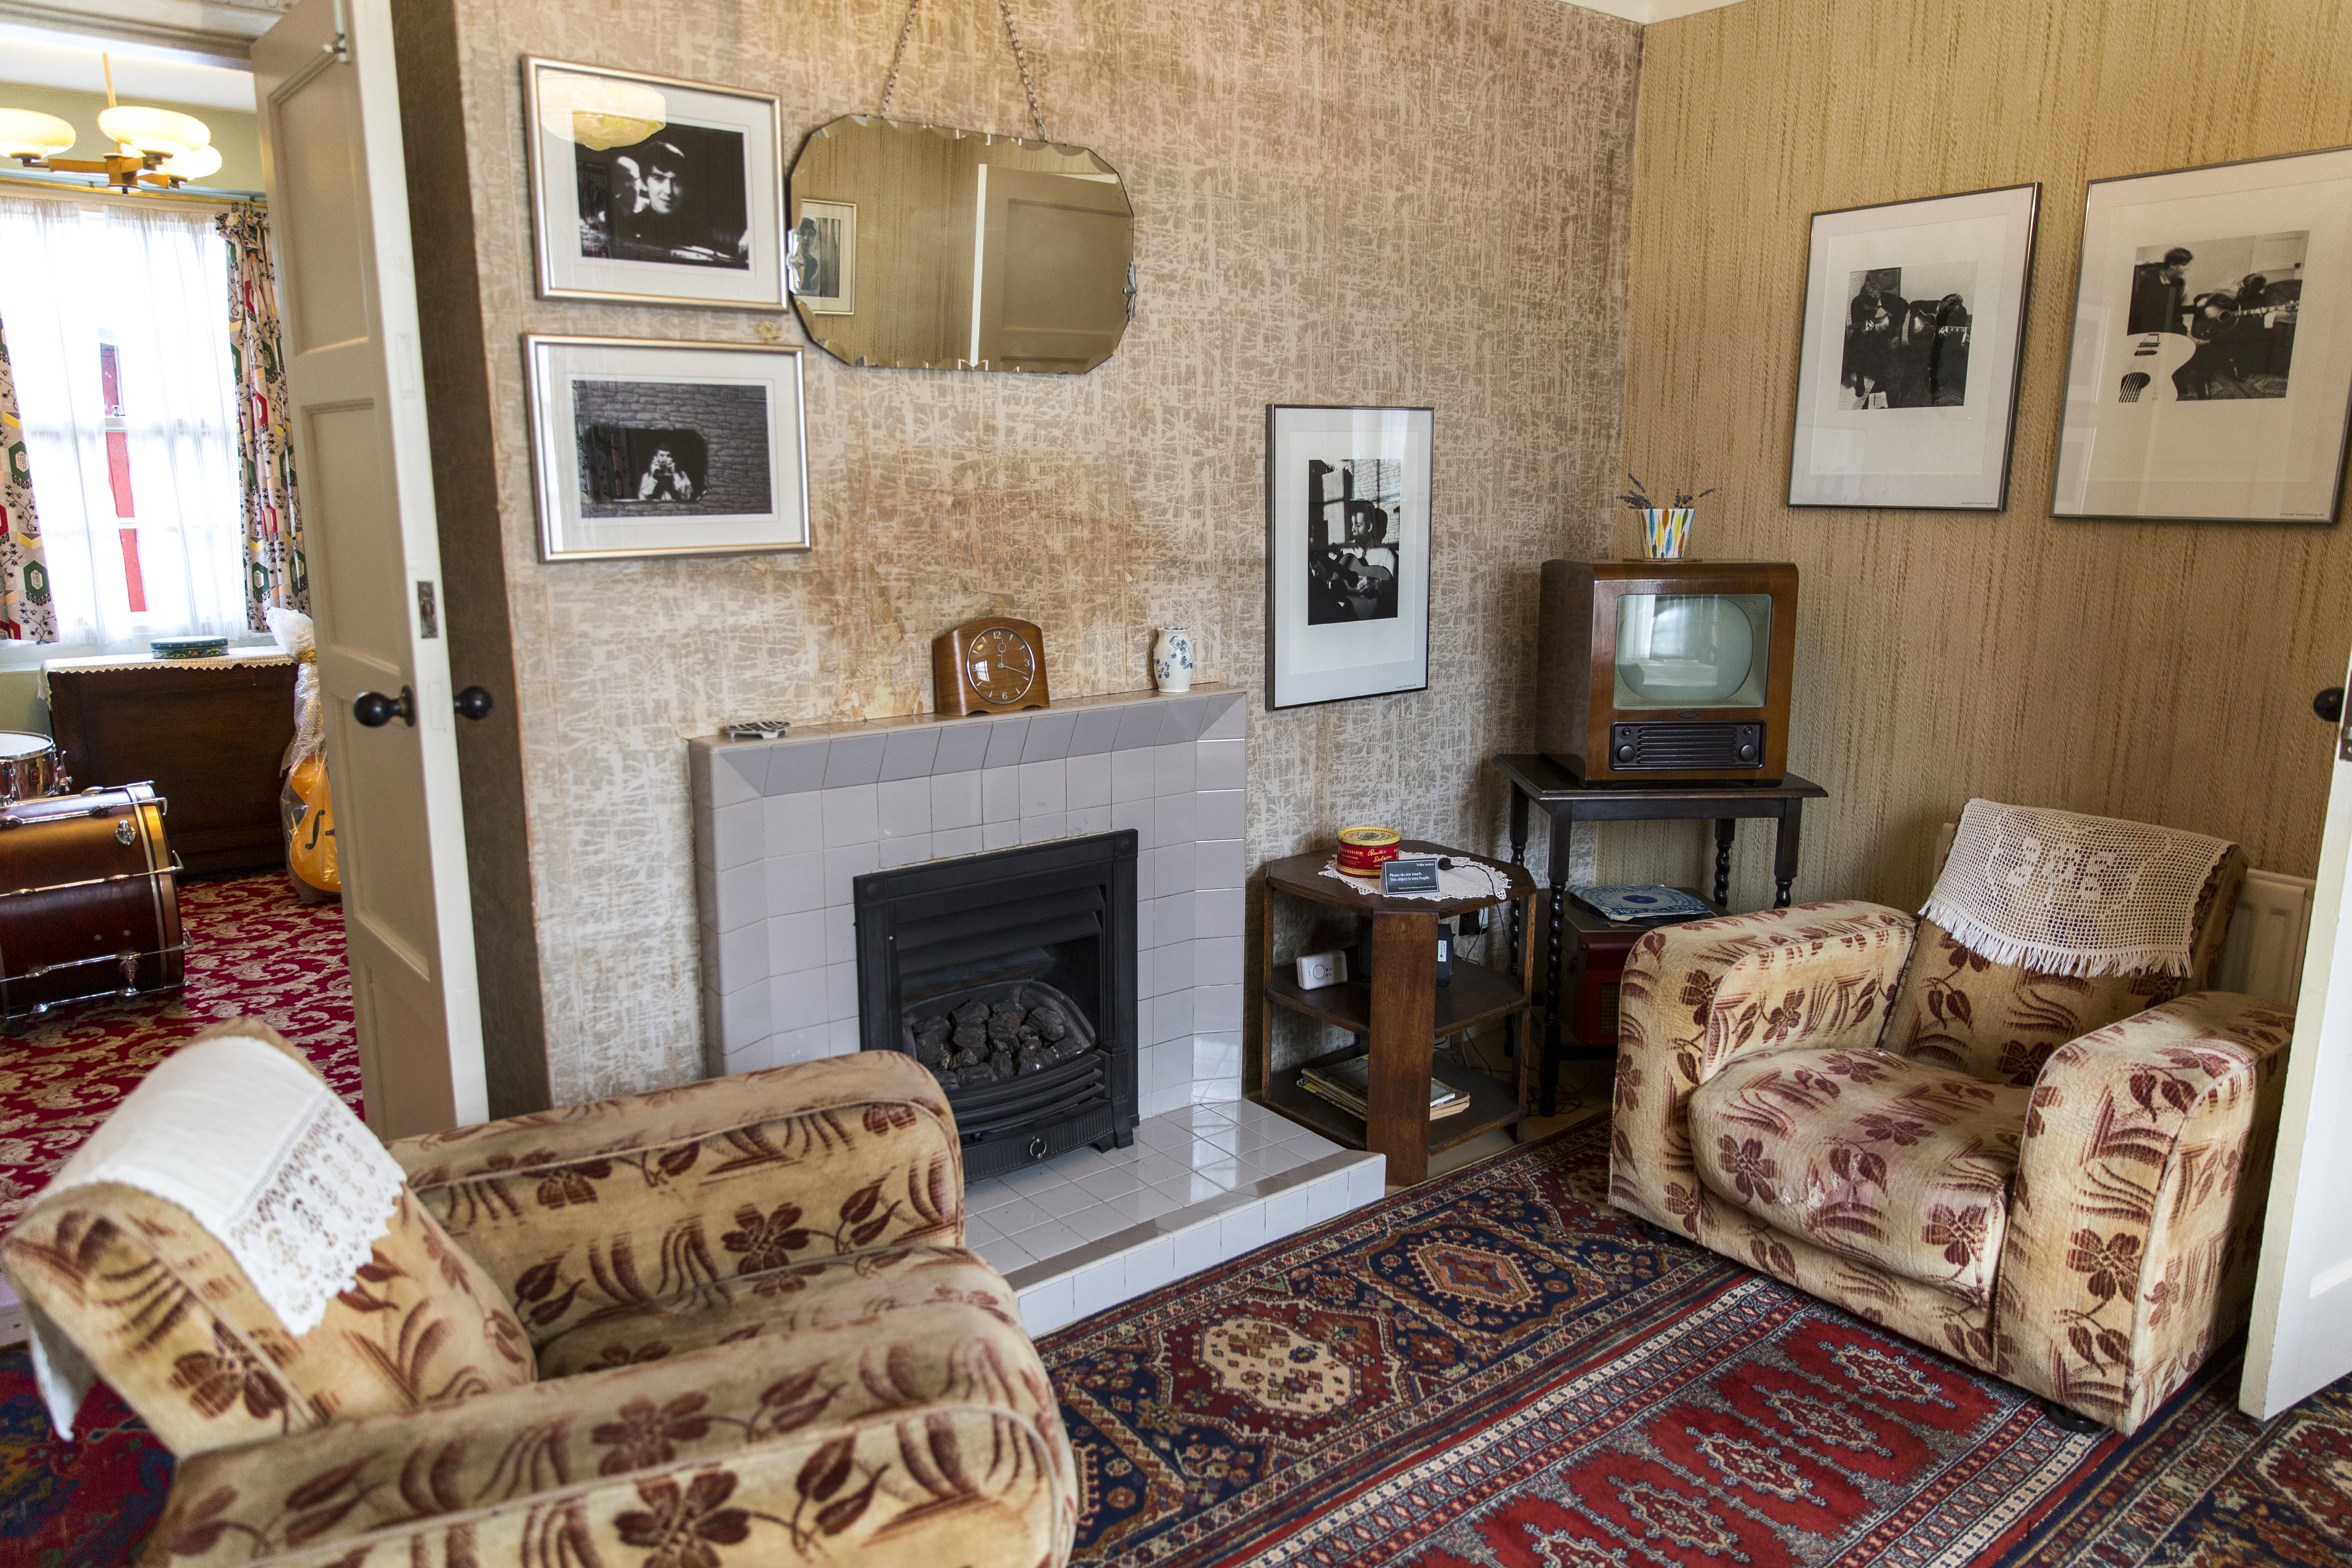 The front room of Sir Paul McCartney's childhood home on Forthlin Road in Allerton, Liverpool (Annapurna Mellor/National Trust/PA)